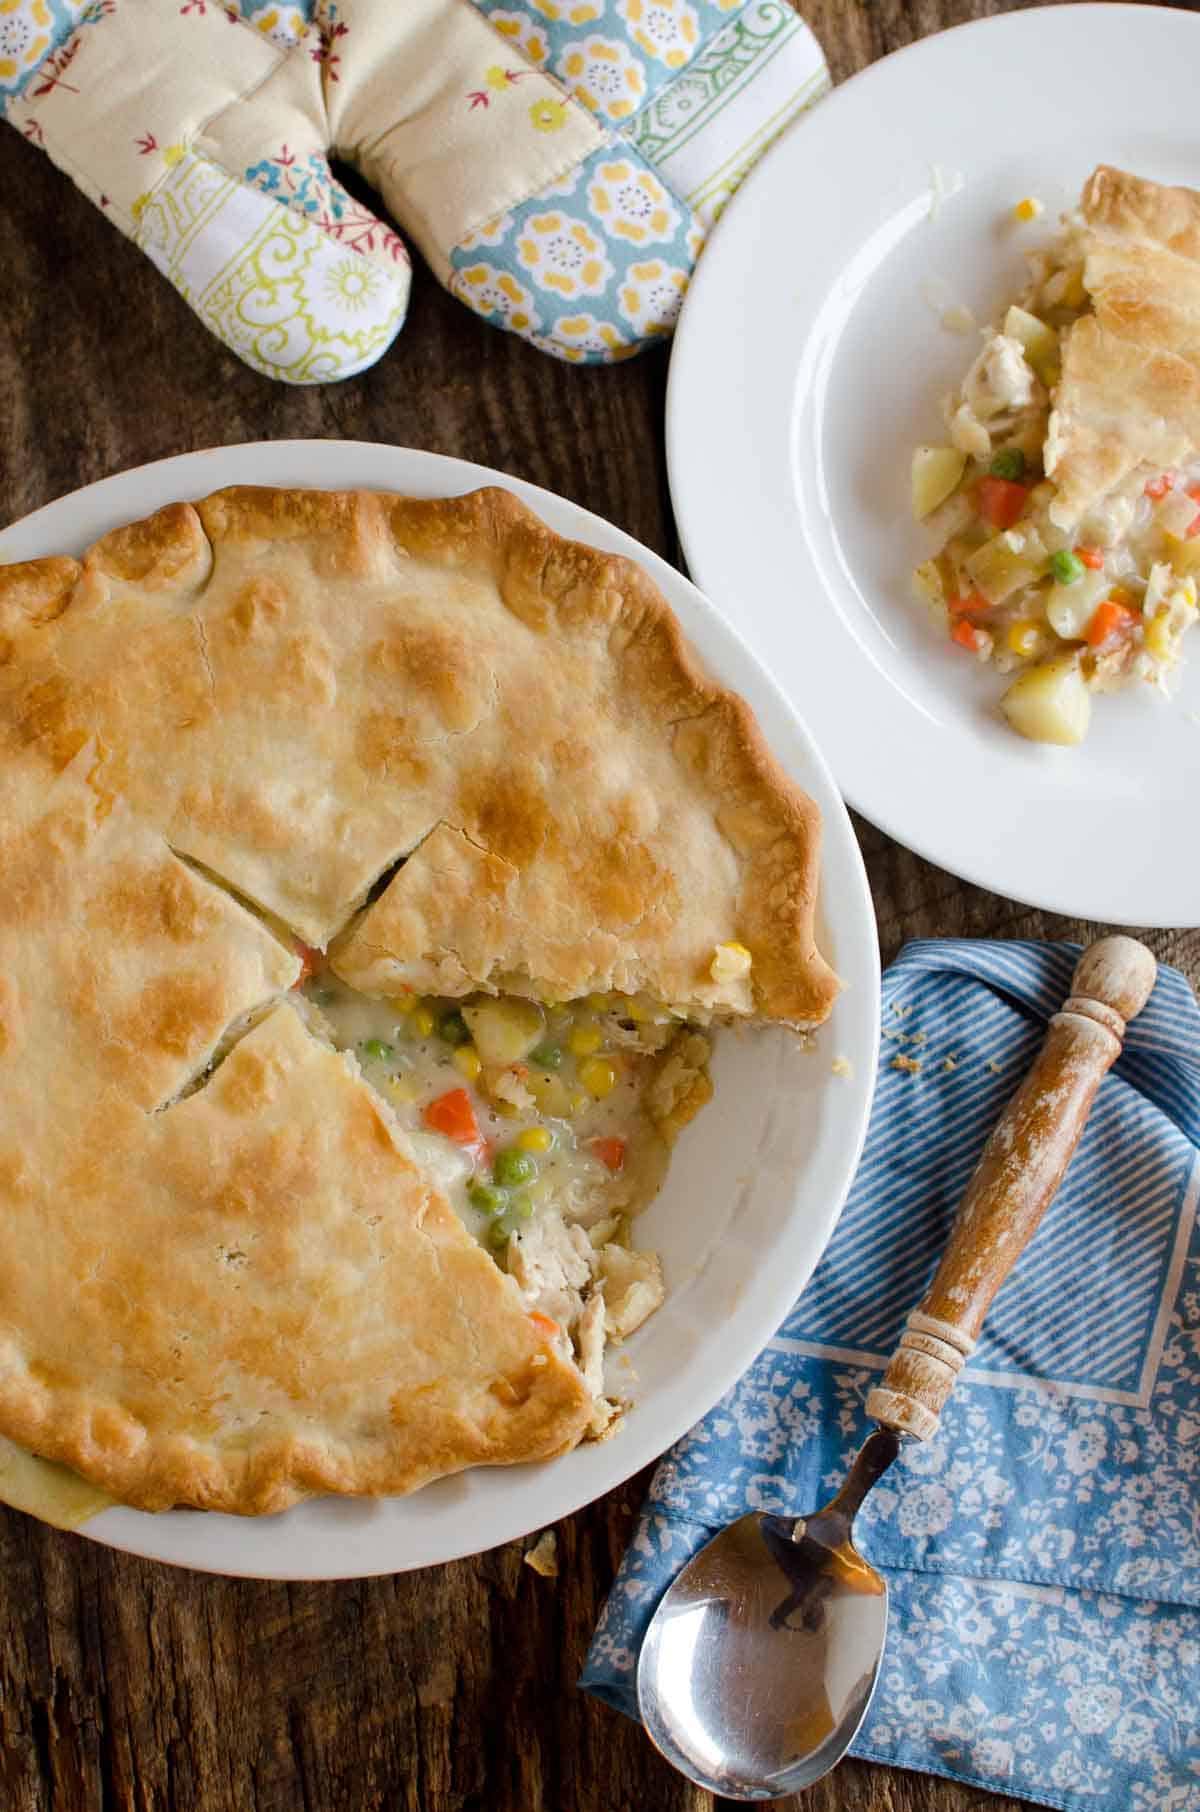 Easy Chicken Pot Pie Recipe - Refrigerated pie crust and simple